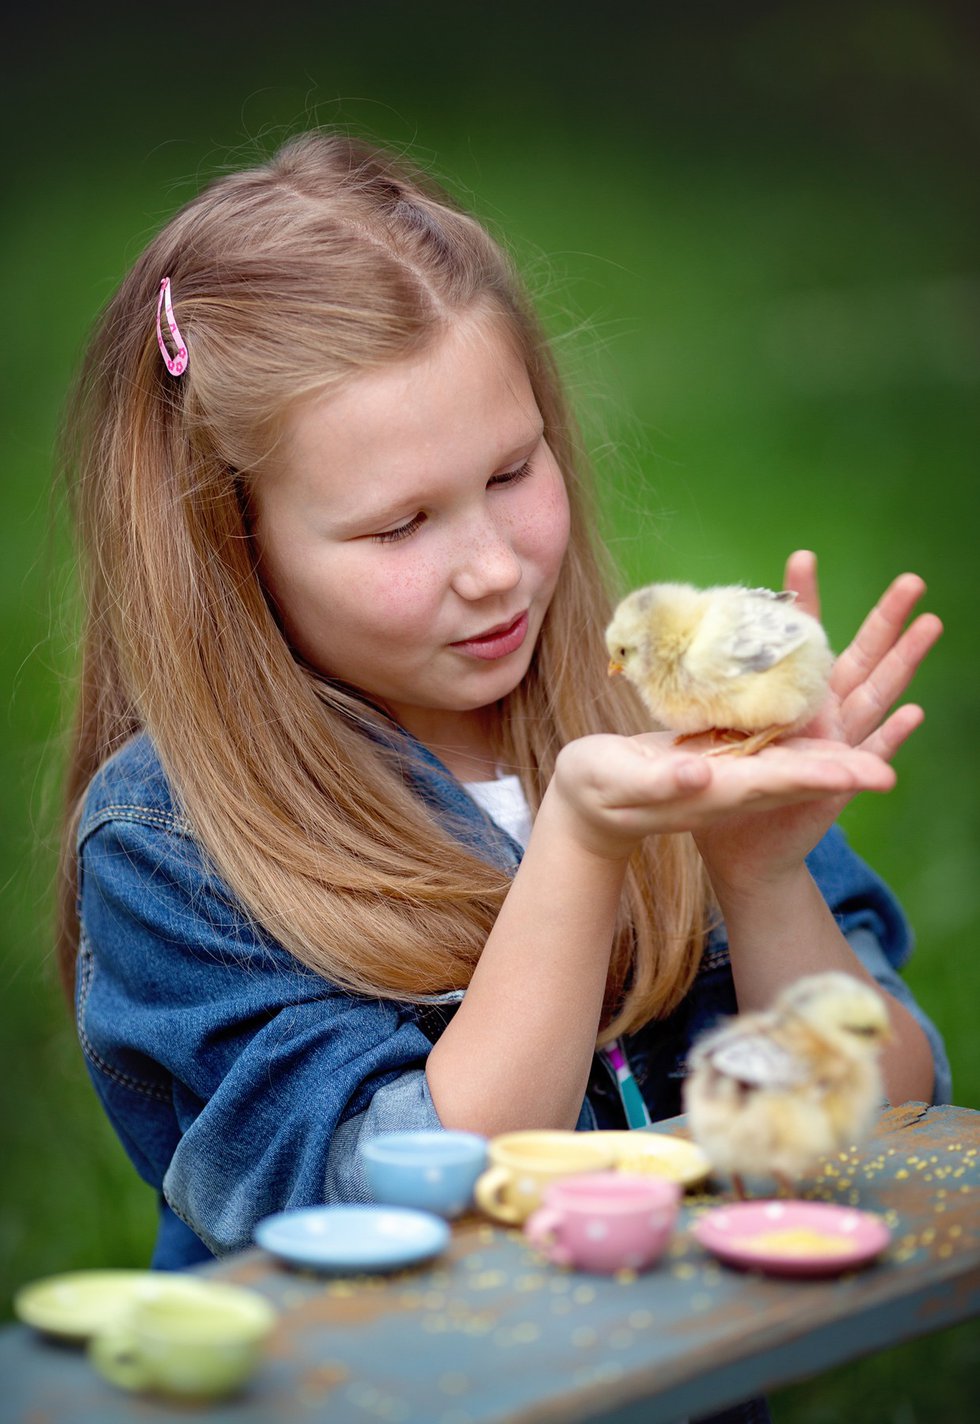 imagesevents27430girl-with-chick-jpg.jpe